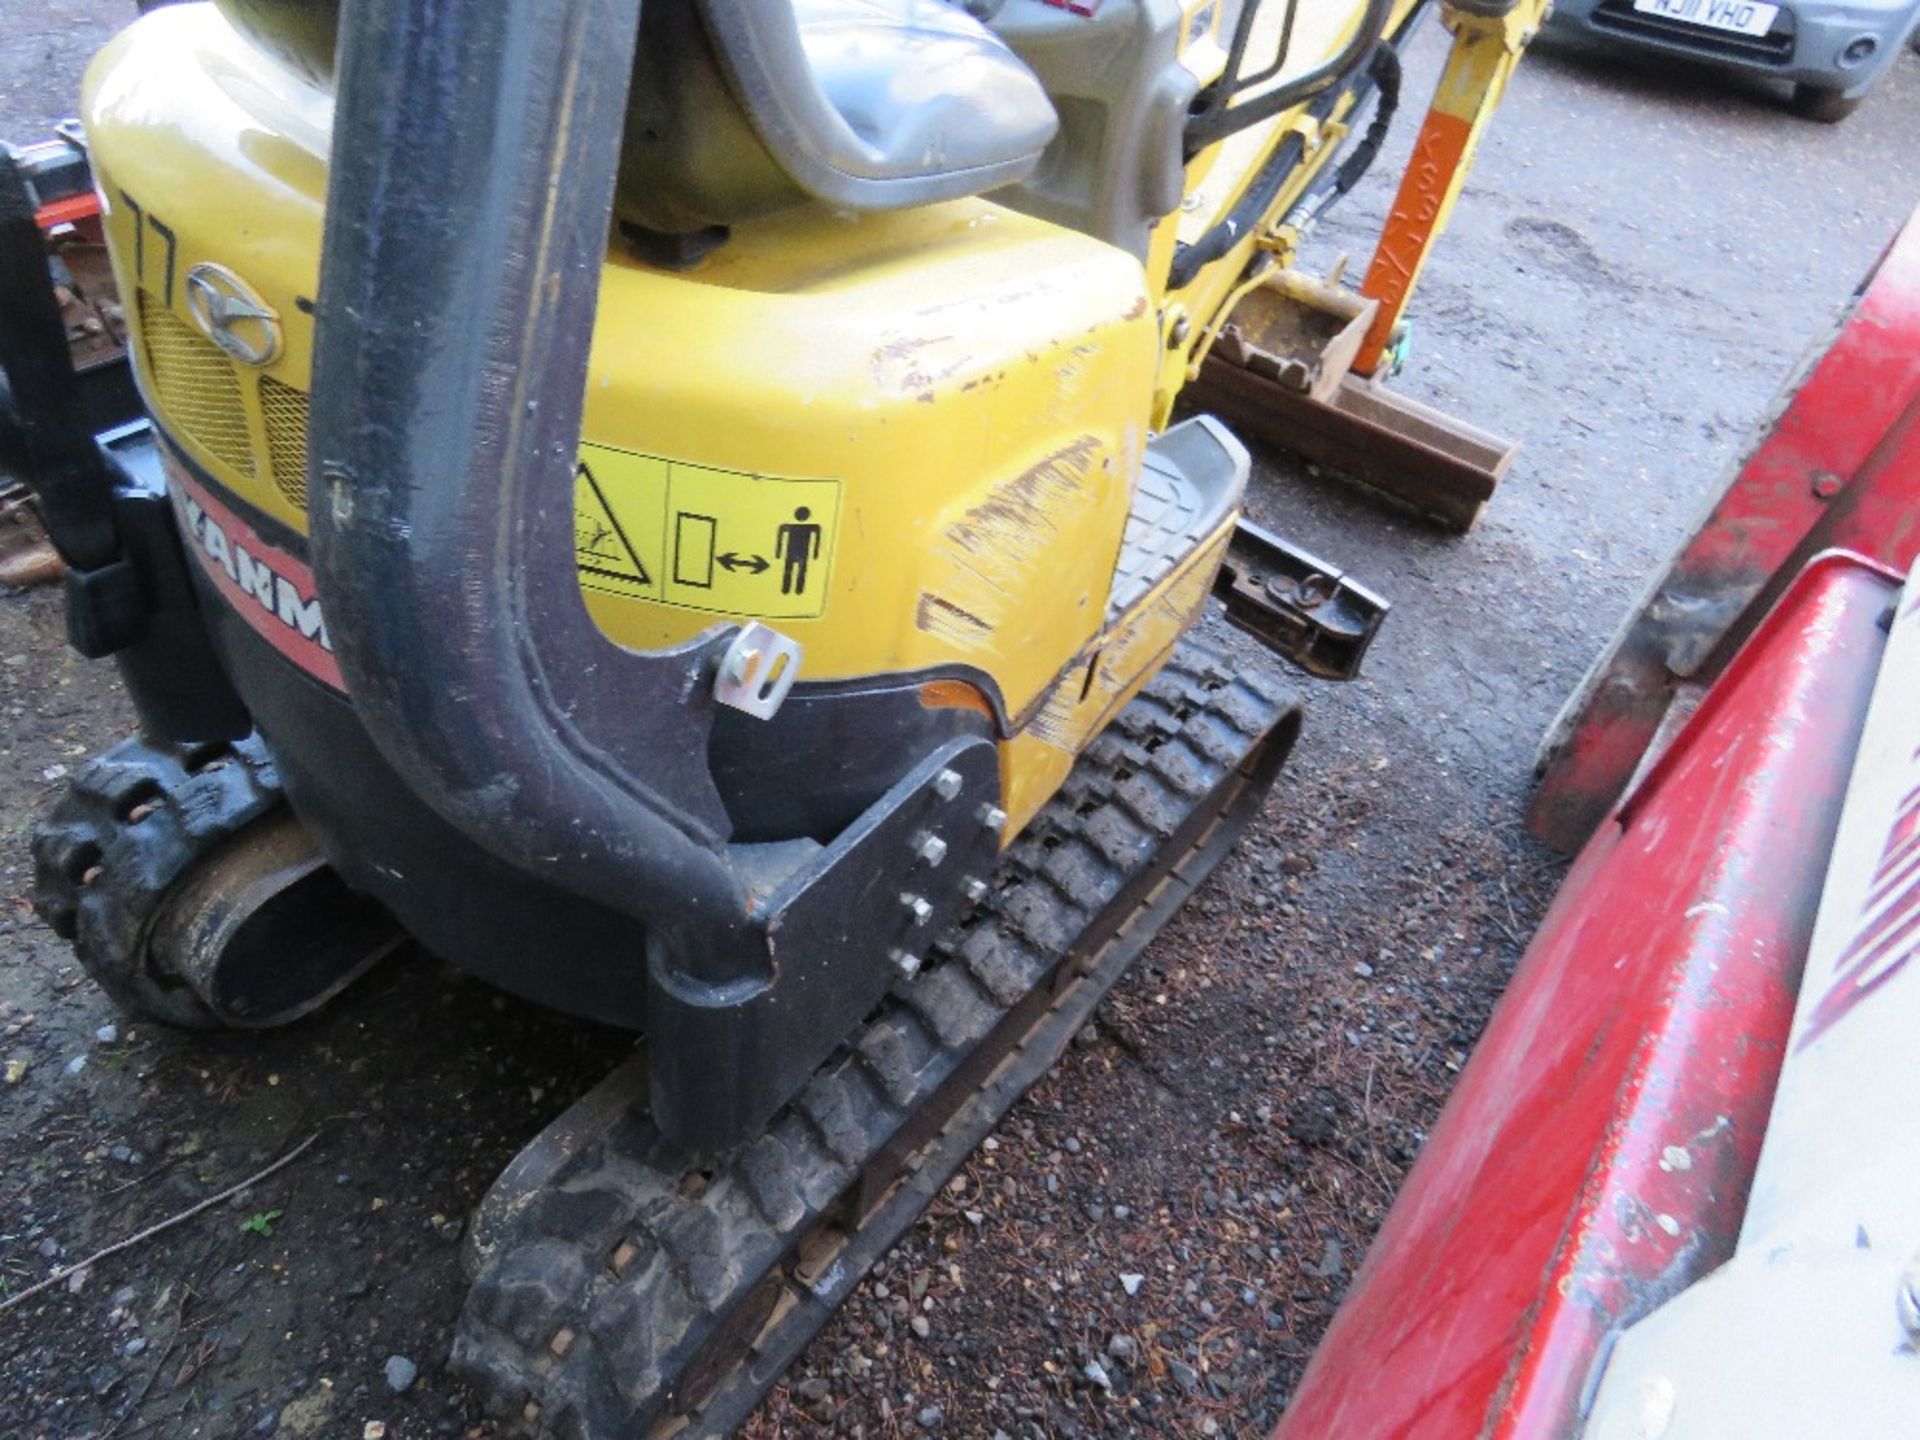 YANMAR SV08 MICRO EXCAVATOR YEAR 2014. 2 X BUCKETS. 1750 REC HOURS. DIRECT FROM LOCAL COMPANY AS PAR - Image 8 of 8